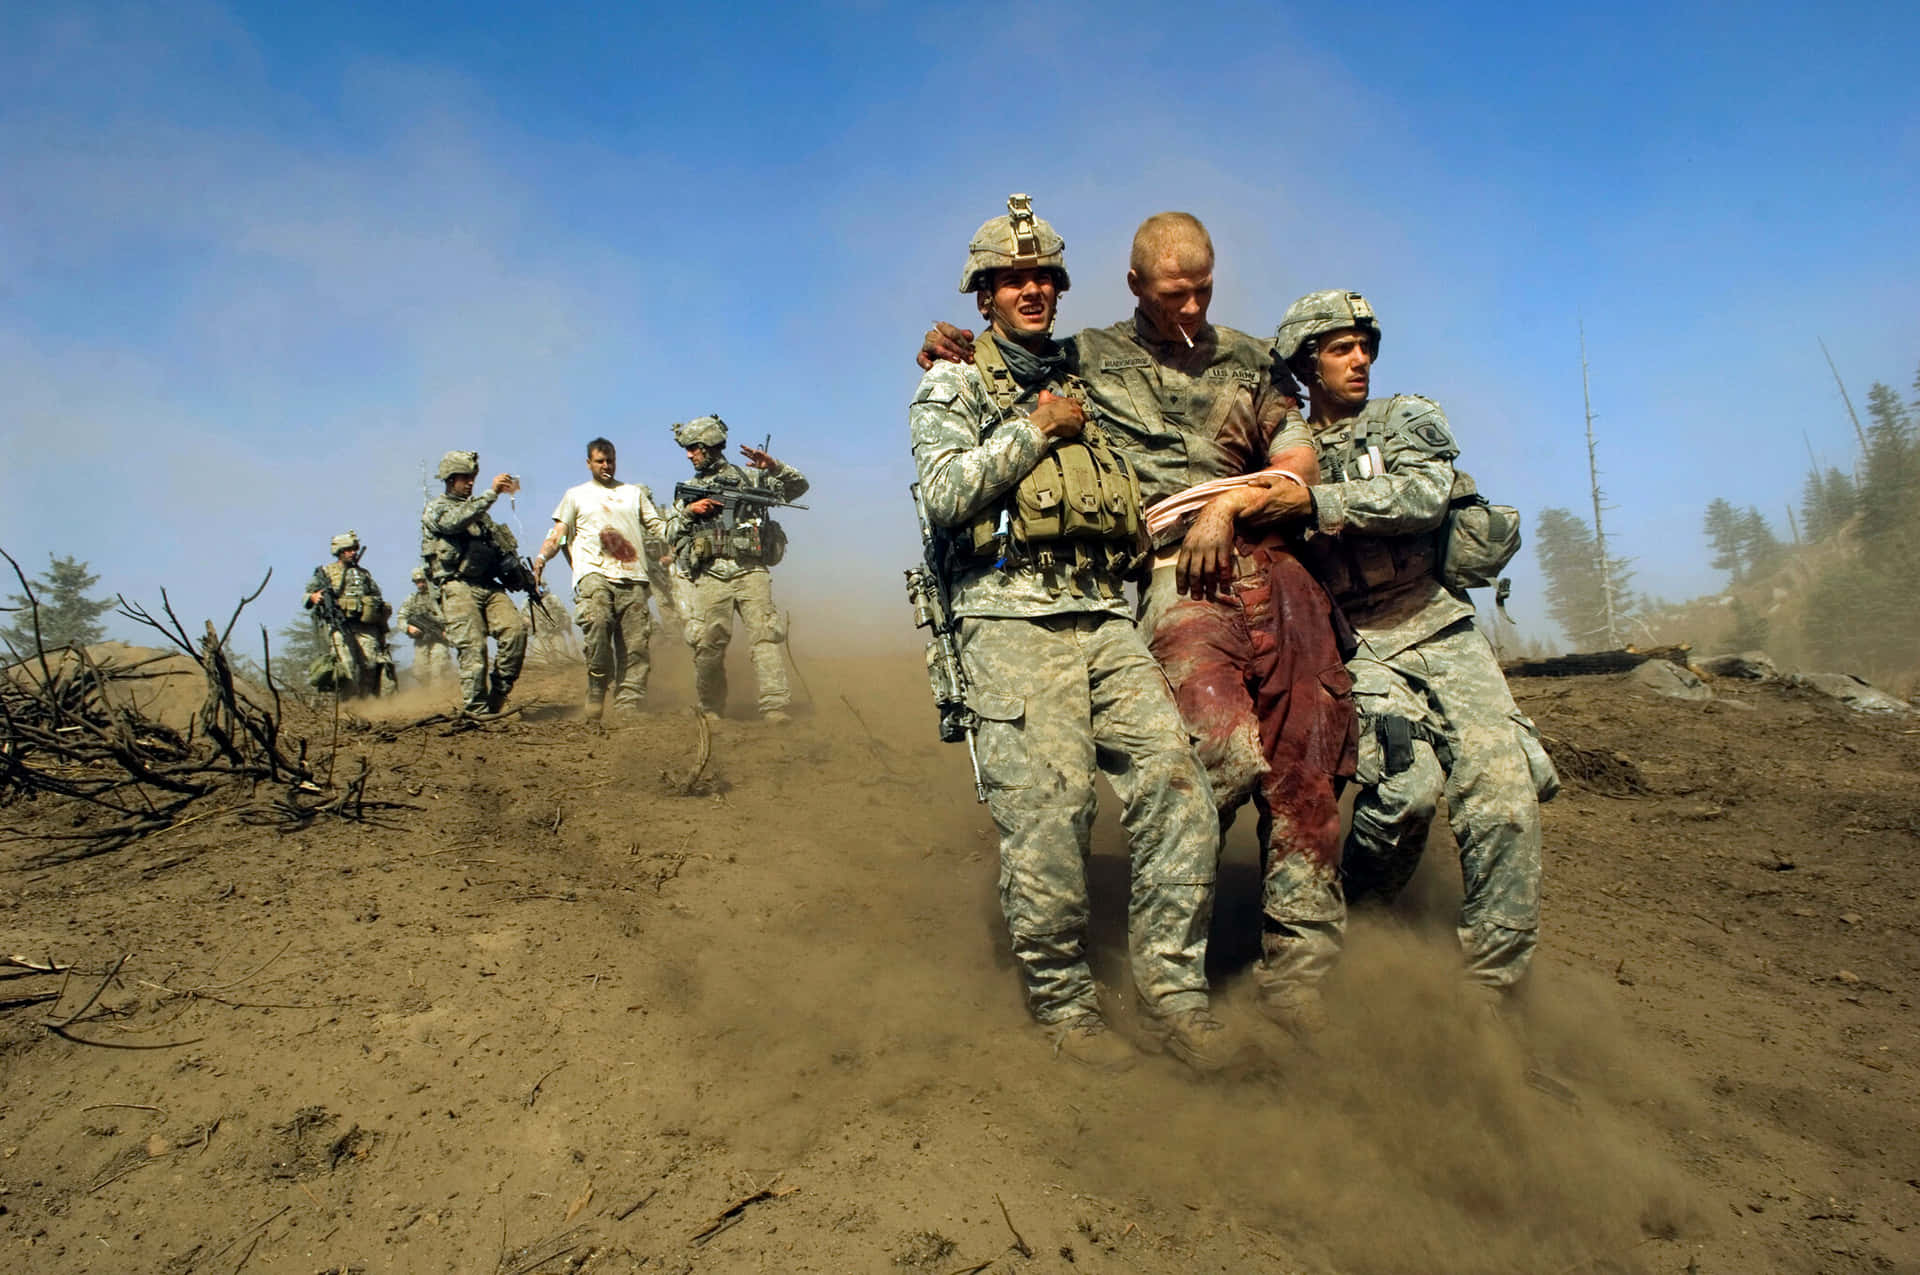 The Painful Cost of War